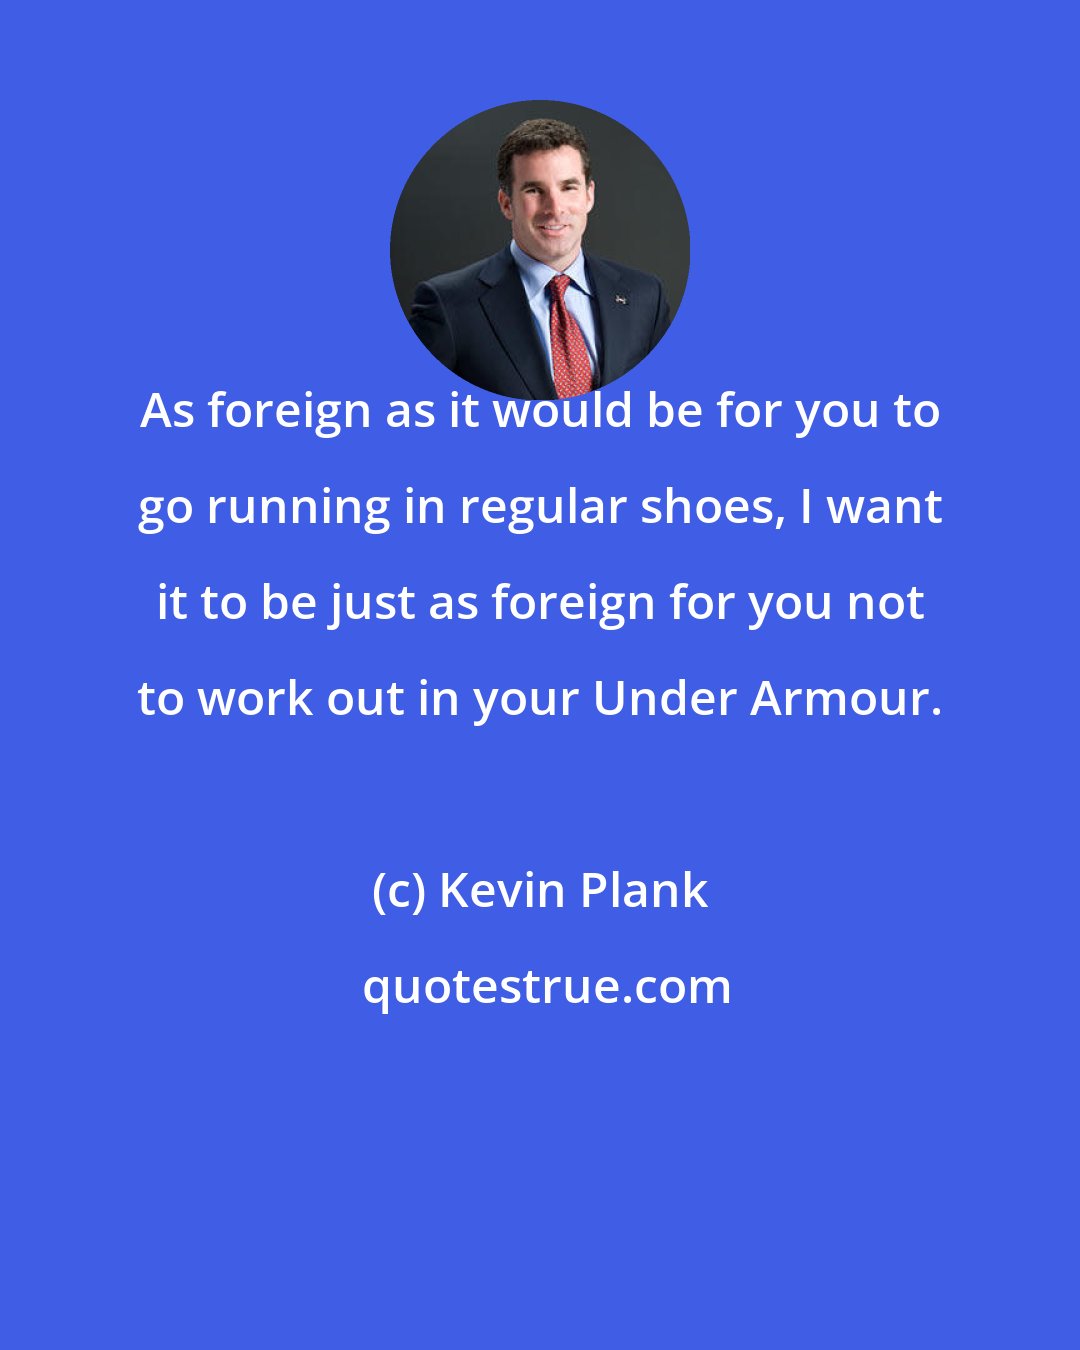 Kevin Plank: As foreign as it would be for you to go running in regular shoes, I want it to be just as foreign for you not to work out in your Under Armour.